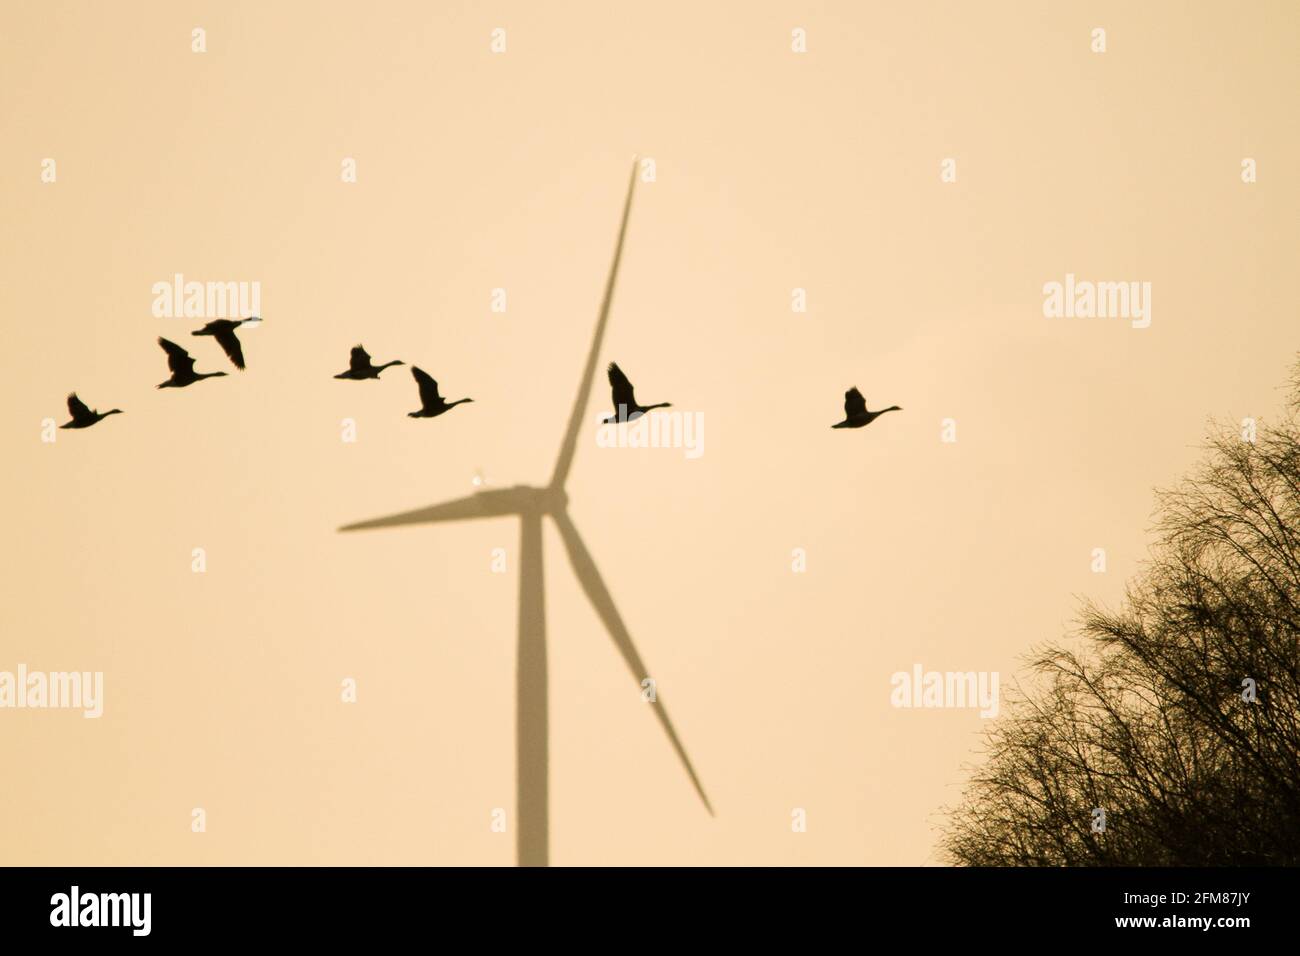 silhouette of a flock of birds with a wind turbine in the background symbolizing conflict with the avifauna Stock Photo